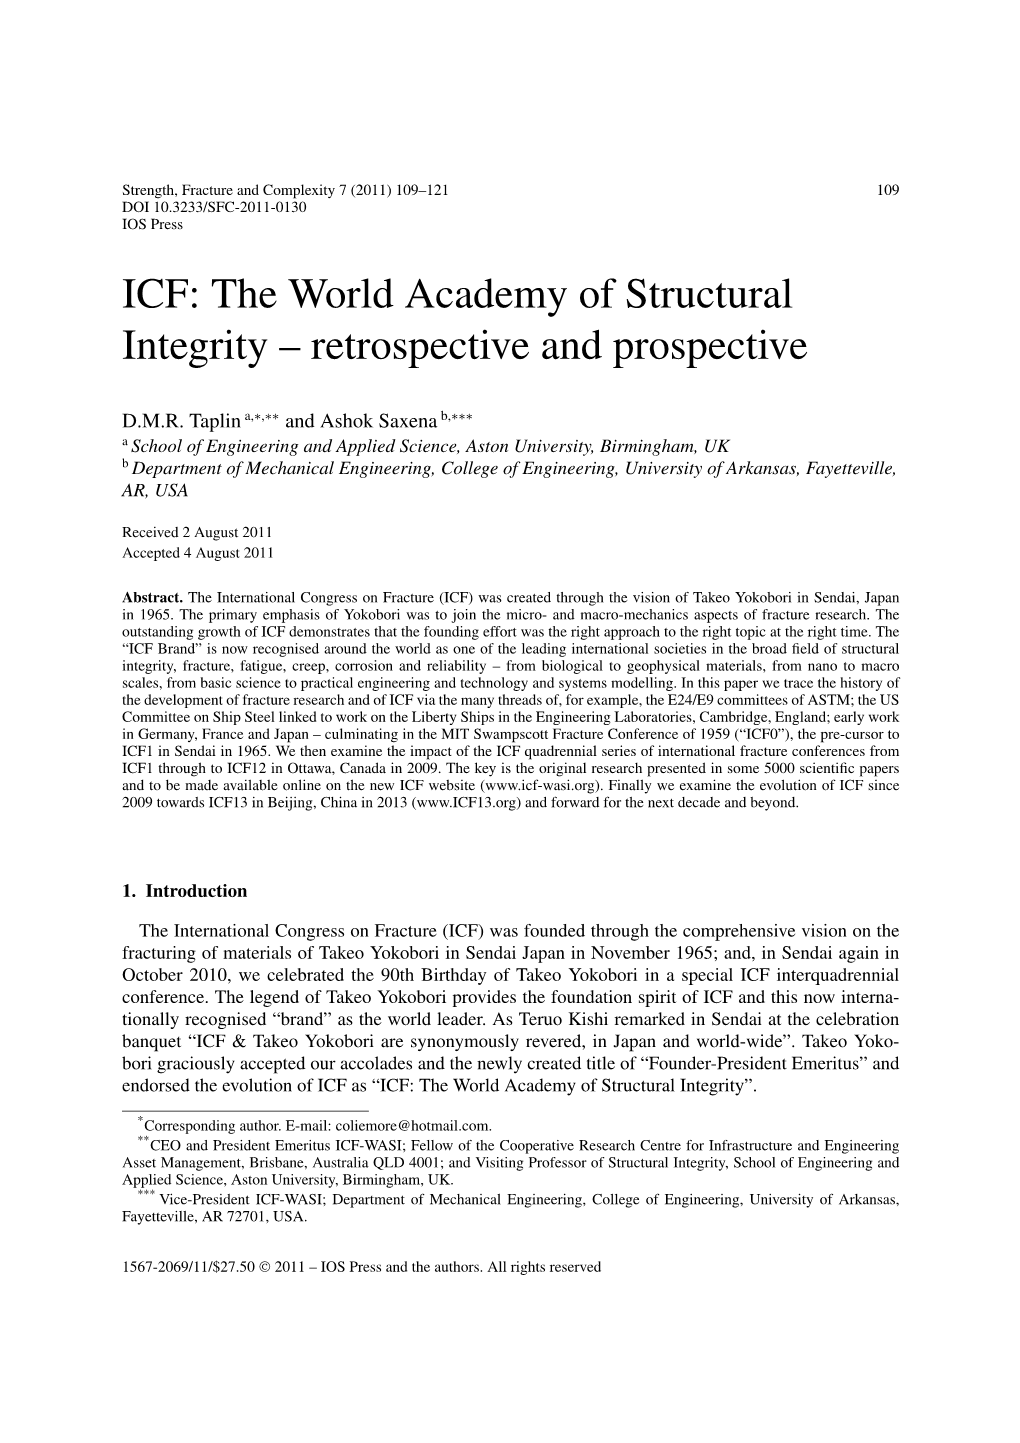 ICF: the World Academy of Structural Integrity – Retrospective and Prospective